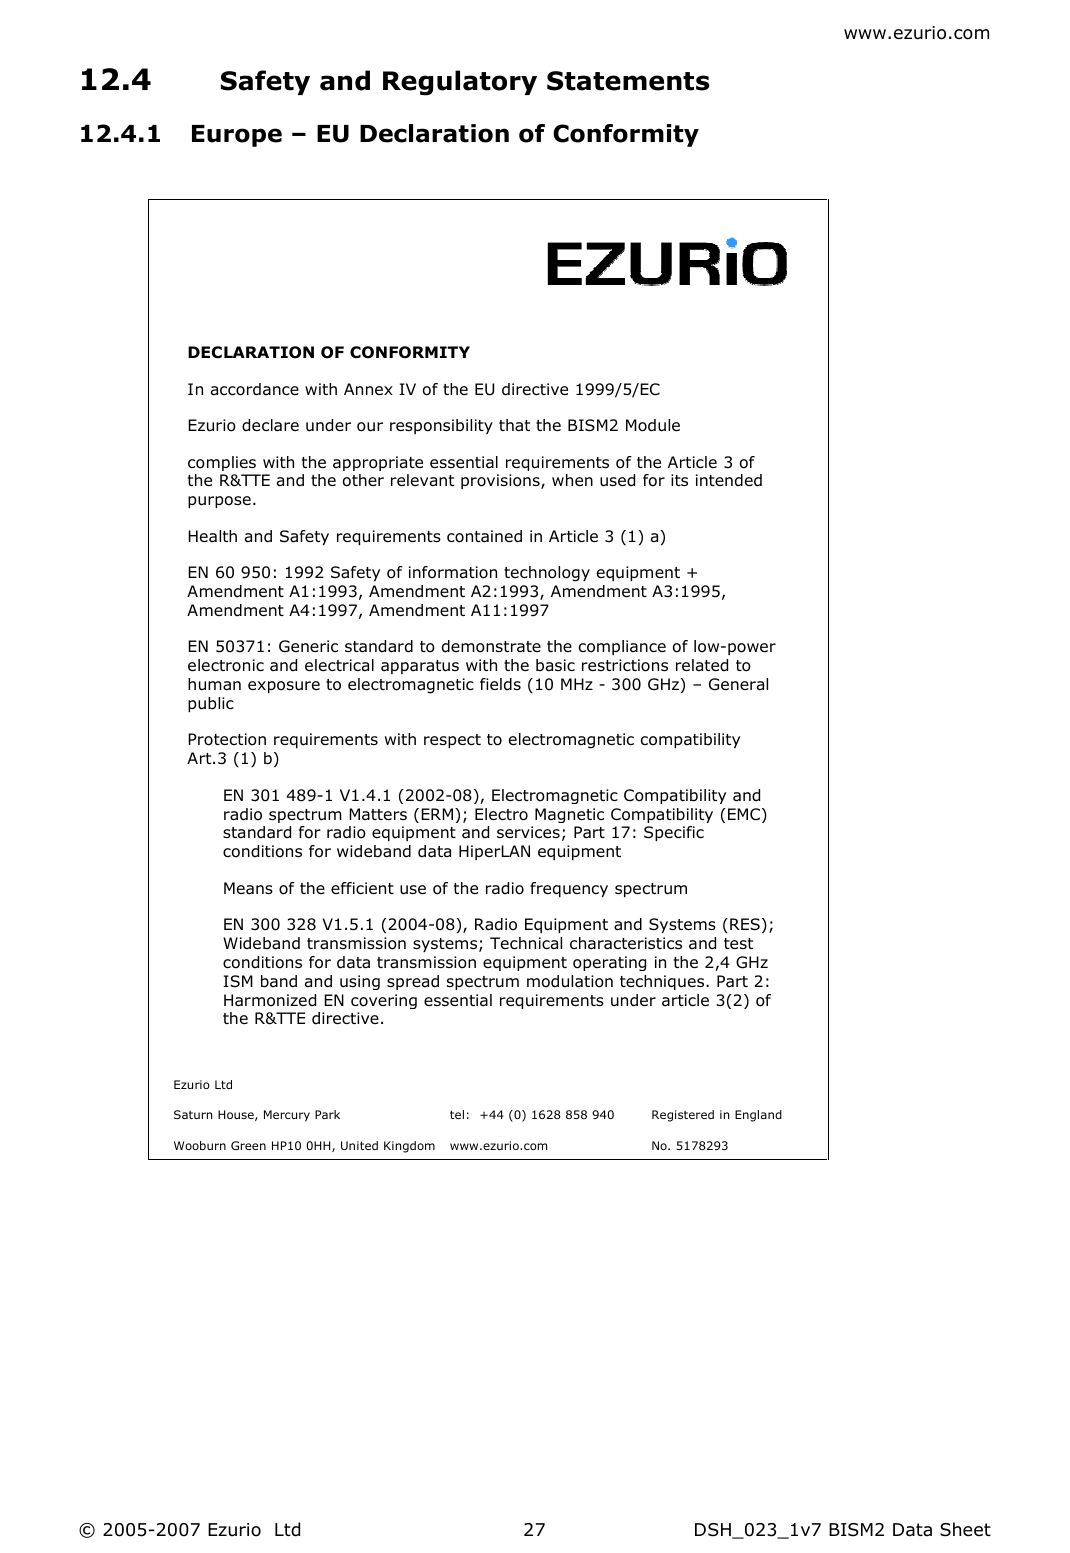 www.ezurio.com © 2005-2007 Ezurio  Ltd  DSH_023_1v7 BISM2 Data Sheet  2712.4 Safety and Regulatory Statements 12.4.1 Europe – EU Declaration of Conformity       DECLARATION OF CONFORMITY  In accordance with Annex IV of the EU directive 1999/5/EC Ezurio declare under our responsibility that the BISM2 Module complies with the appropriate essential requirements of the Article 3 of the R&amp;TTE and the other relevant provisions, when used for its intended purpose. Health and Safety requirements contained in Article 3 (1) a) EN 60 950: 1992 Safety of information technology equipment + Amendment A1:1993, Amendment A2:1993, Amendment A3:1995, Amendment A4:1997, Amendment A11:1997 EN 50371: Generic standard to demonstrate the compliance of low-power electronic and electrical apparatus with the basic restrictions related to human exposure to electromagnetic fields (10 MHz - 300 GHz) – General public  Protection requirements with respect to electromagnetic compatibility Art.3 (1) b) EN 301 489-1 V1.4.1 (2002-08), Electromagnetic Compatibility and radio spectrum Matters (ERM); Electro Magnetic Compatibility (EMC) standard for radio equipment and services; Part 17: Specific conditions for wideband data HiperLAN equipment  Means of the efficient use of the radio frequency spectrum EN 300 328 V1.5.1 (2004-08), Radio Equipment and Systems (RES); Wideband transmission systems; Technical characteristics and test conditions for data transmission equipment operating in the 2,4 GHz ISM band and using spread spectrum modulation techniques. Part 2: Harmonized EN covering essential requirements under article 3(2) of the R&amp;TTE directive.   Ezurio Ltd      Saturn House, Mercury Park  tel:  +44 (0) 1628 858 940  Registered in England   Wooburn Green HP10 0HH, United Kingdom  www.ezurio.com  No. 5178293  